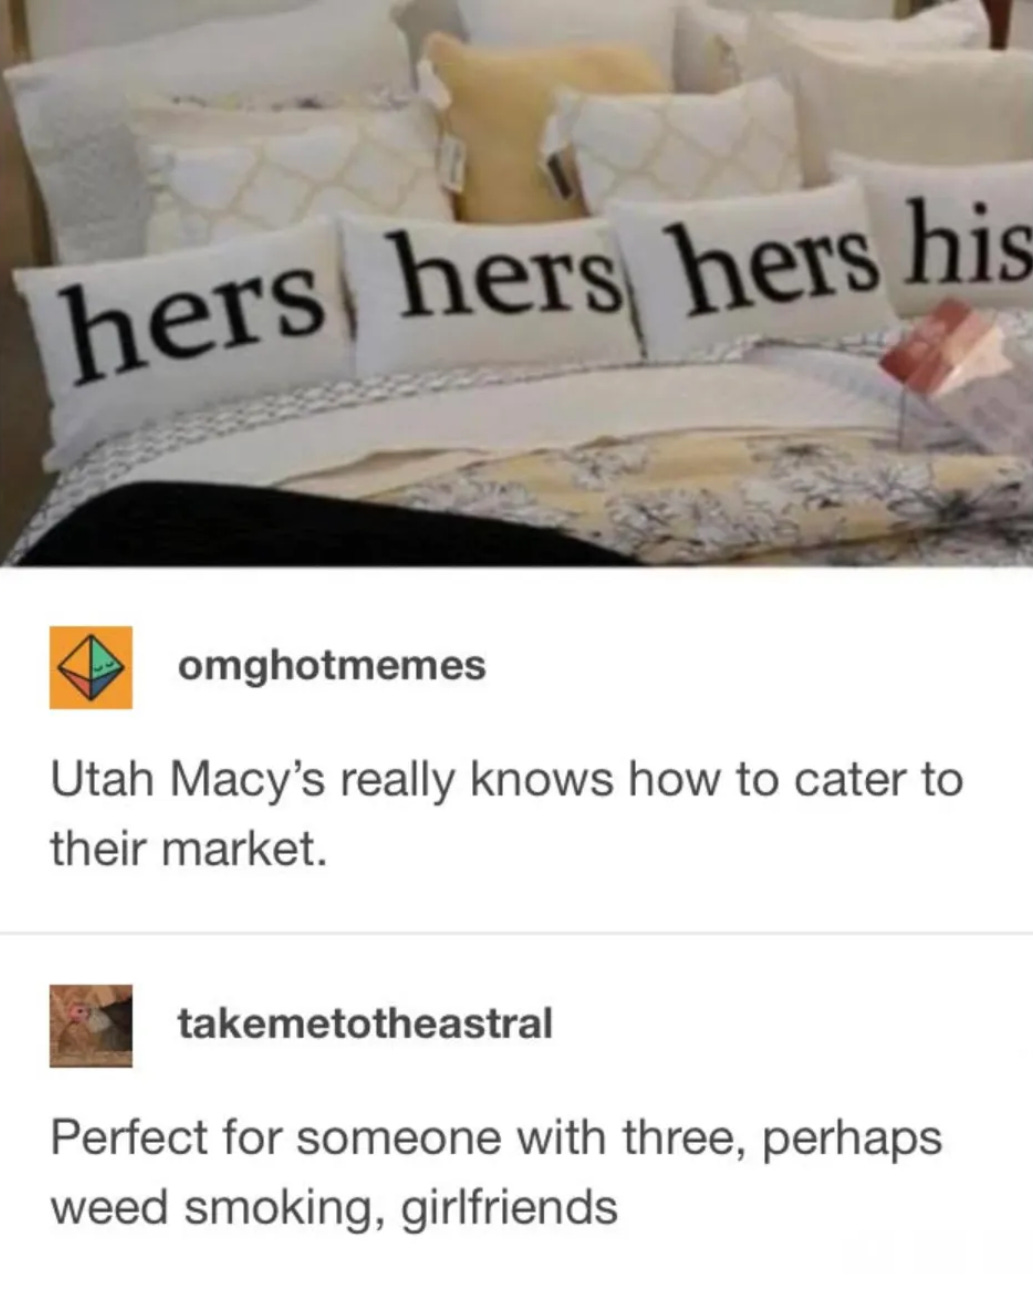 Photo of a bed with 4 pillows reading hers, hers, hers and his. Reply from Tumblr user omghotmemes: Utah Macy's really knows how to cater to their market. Reply from user takemetotheastral: Perfect for someone with three, perhaps weed smoking, girlfriends.